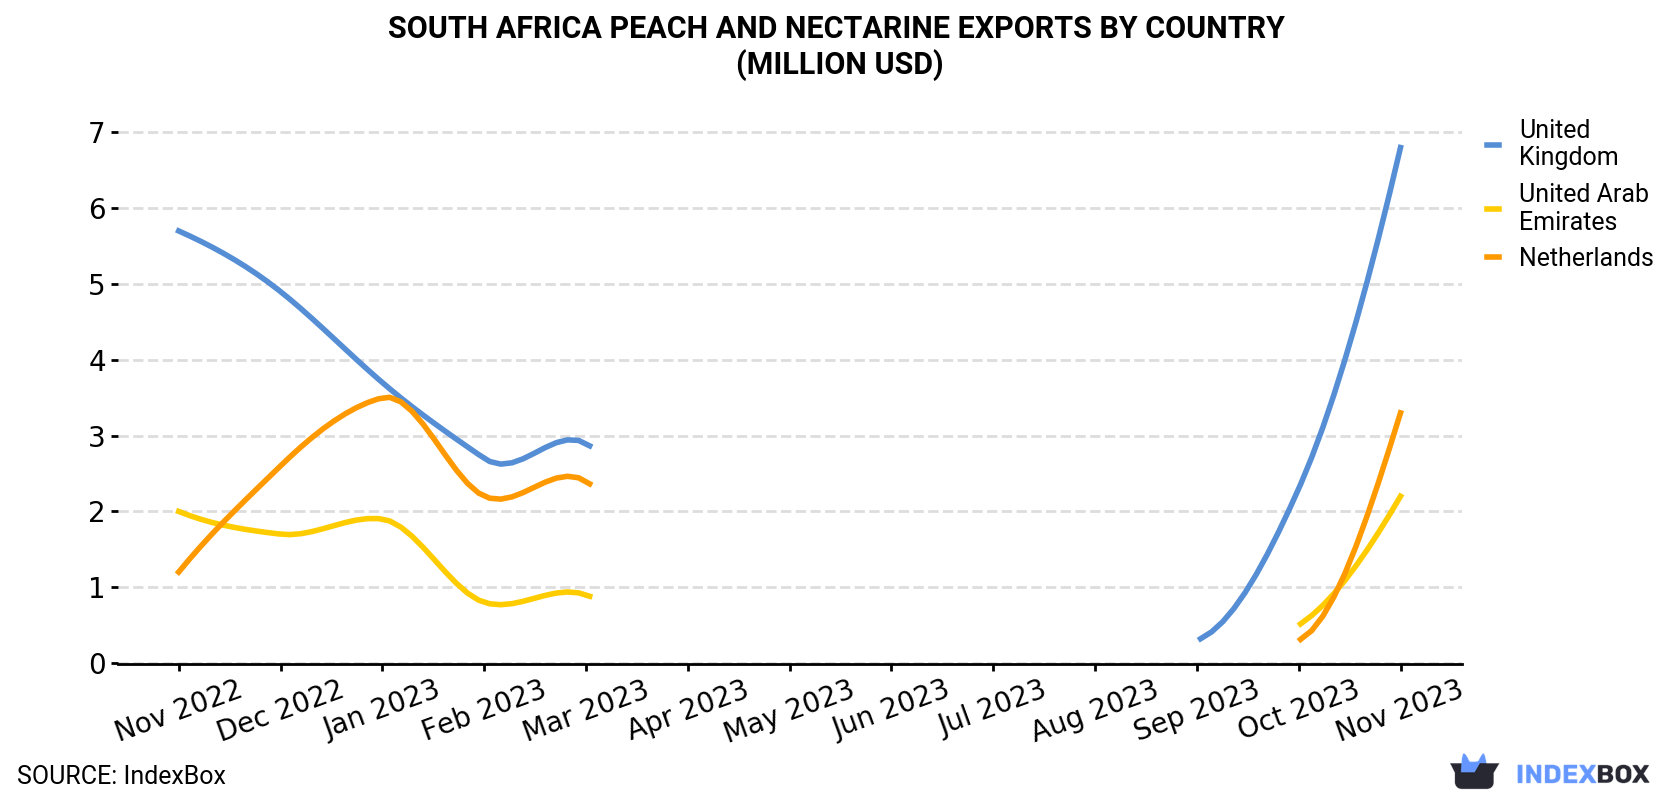 South Africa Peach And Nectarine Exports By Country (Million USD)